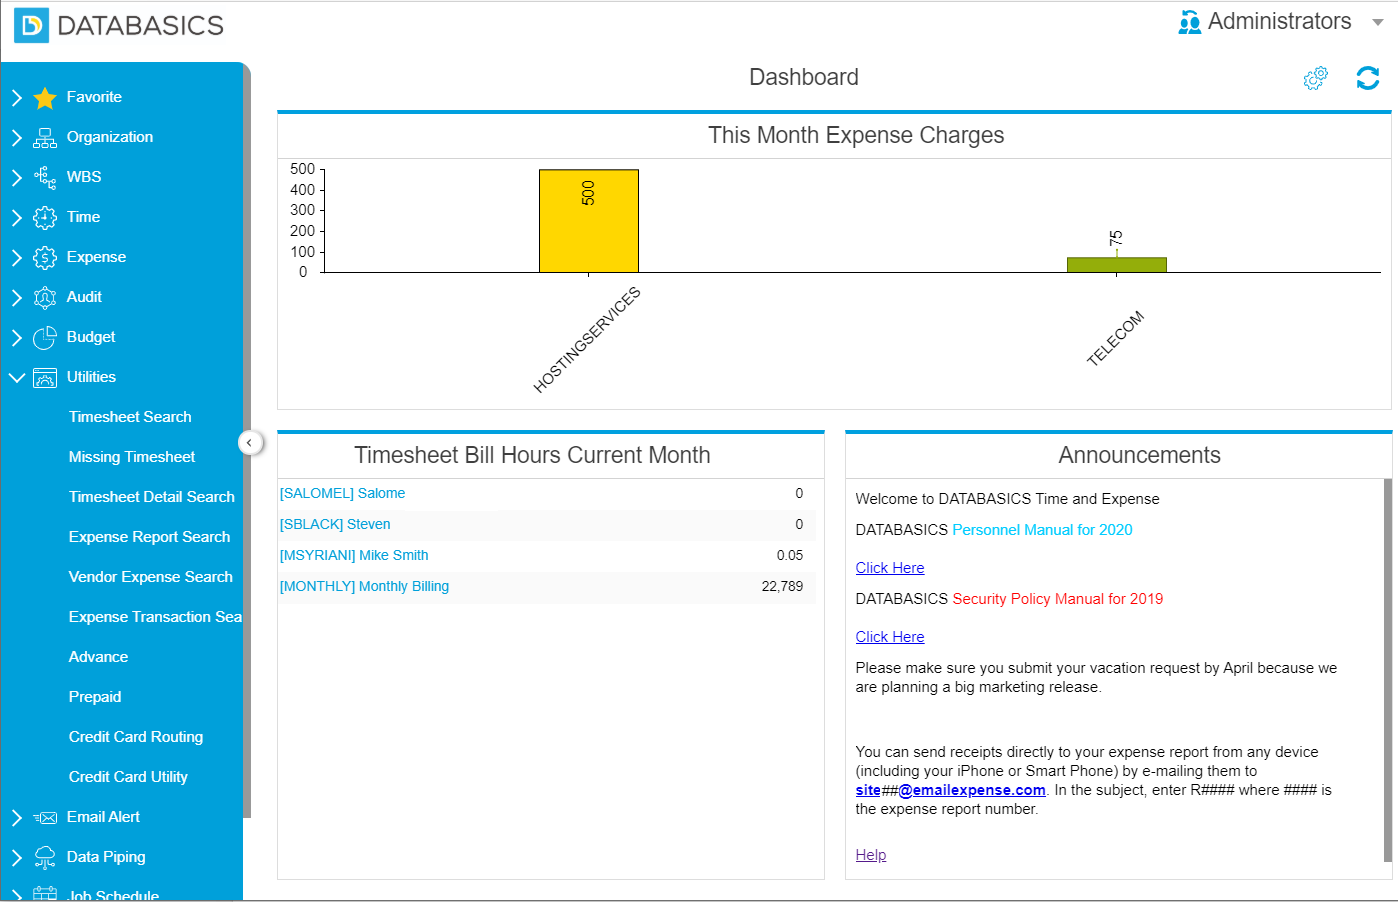 DATABASICS Expense Software - Admin view--Backend view of DATABASICS Expense